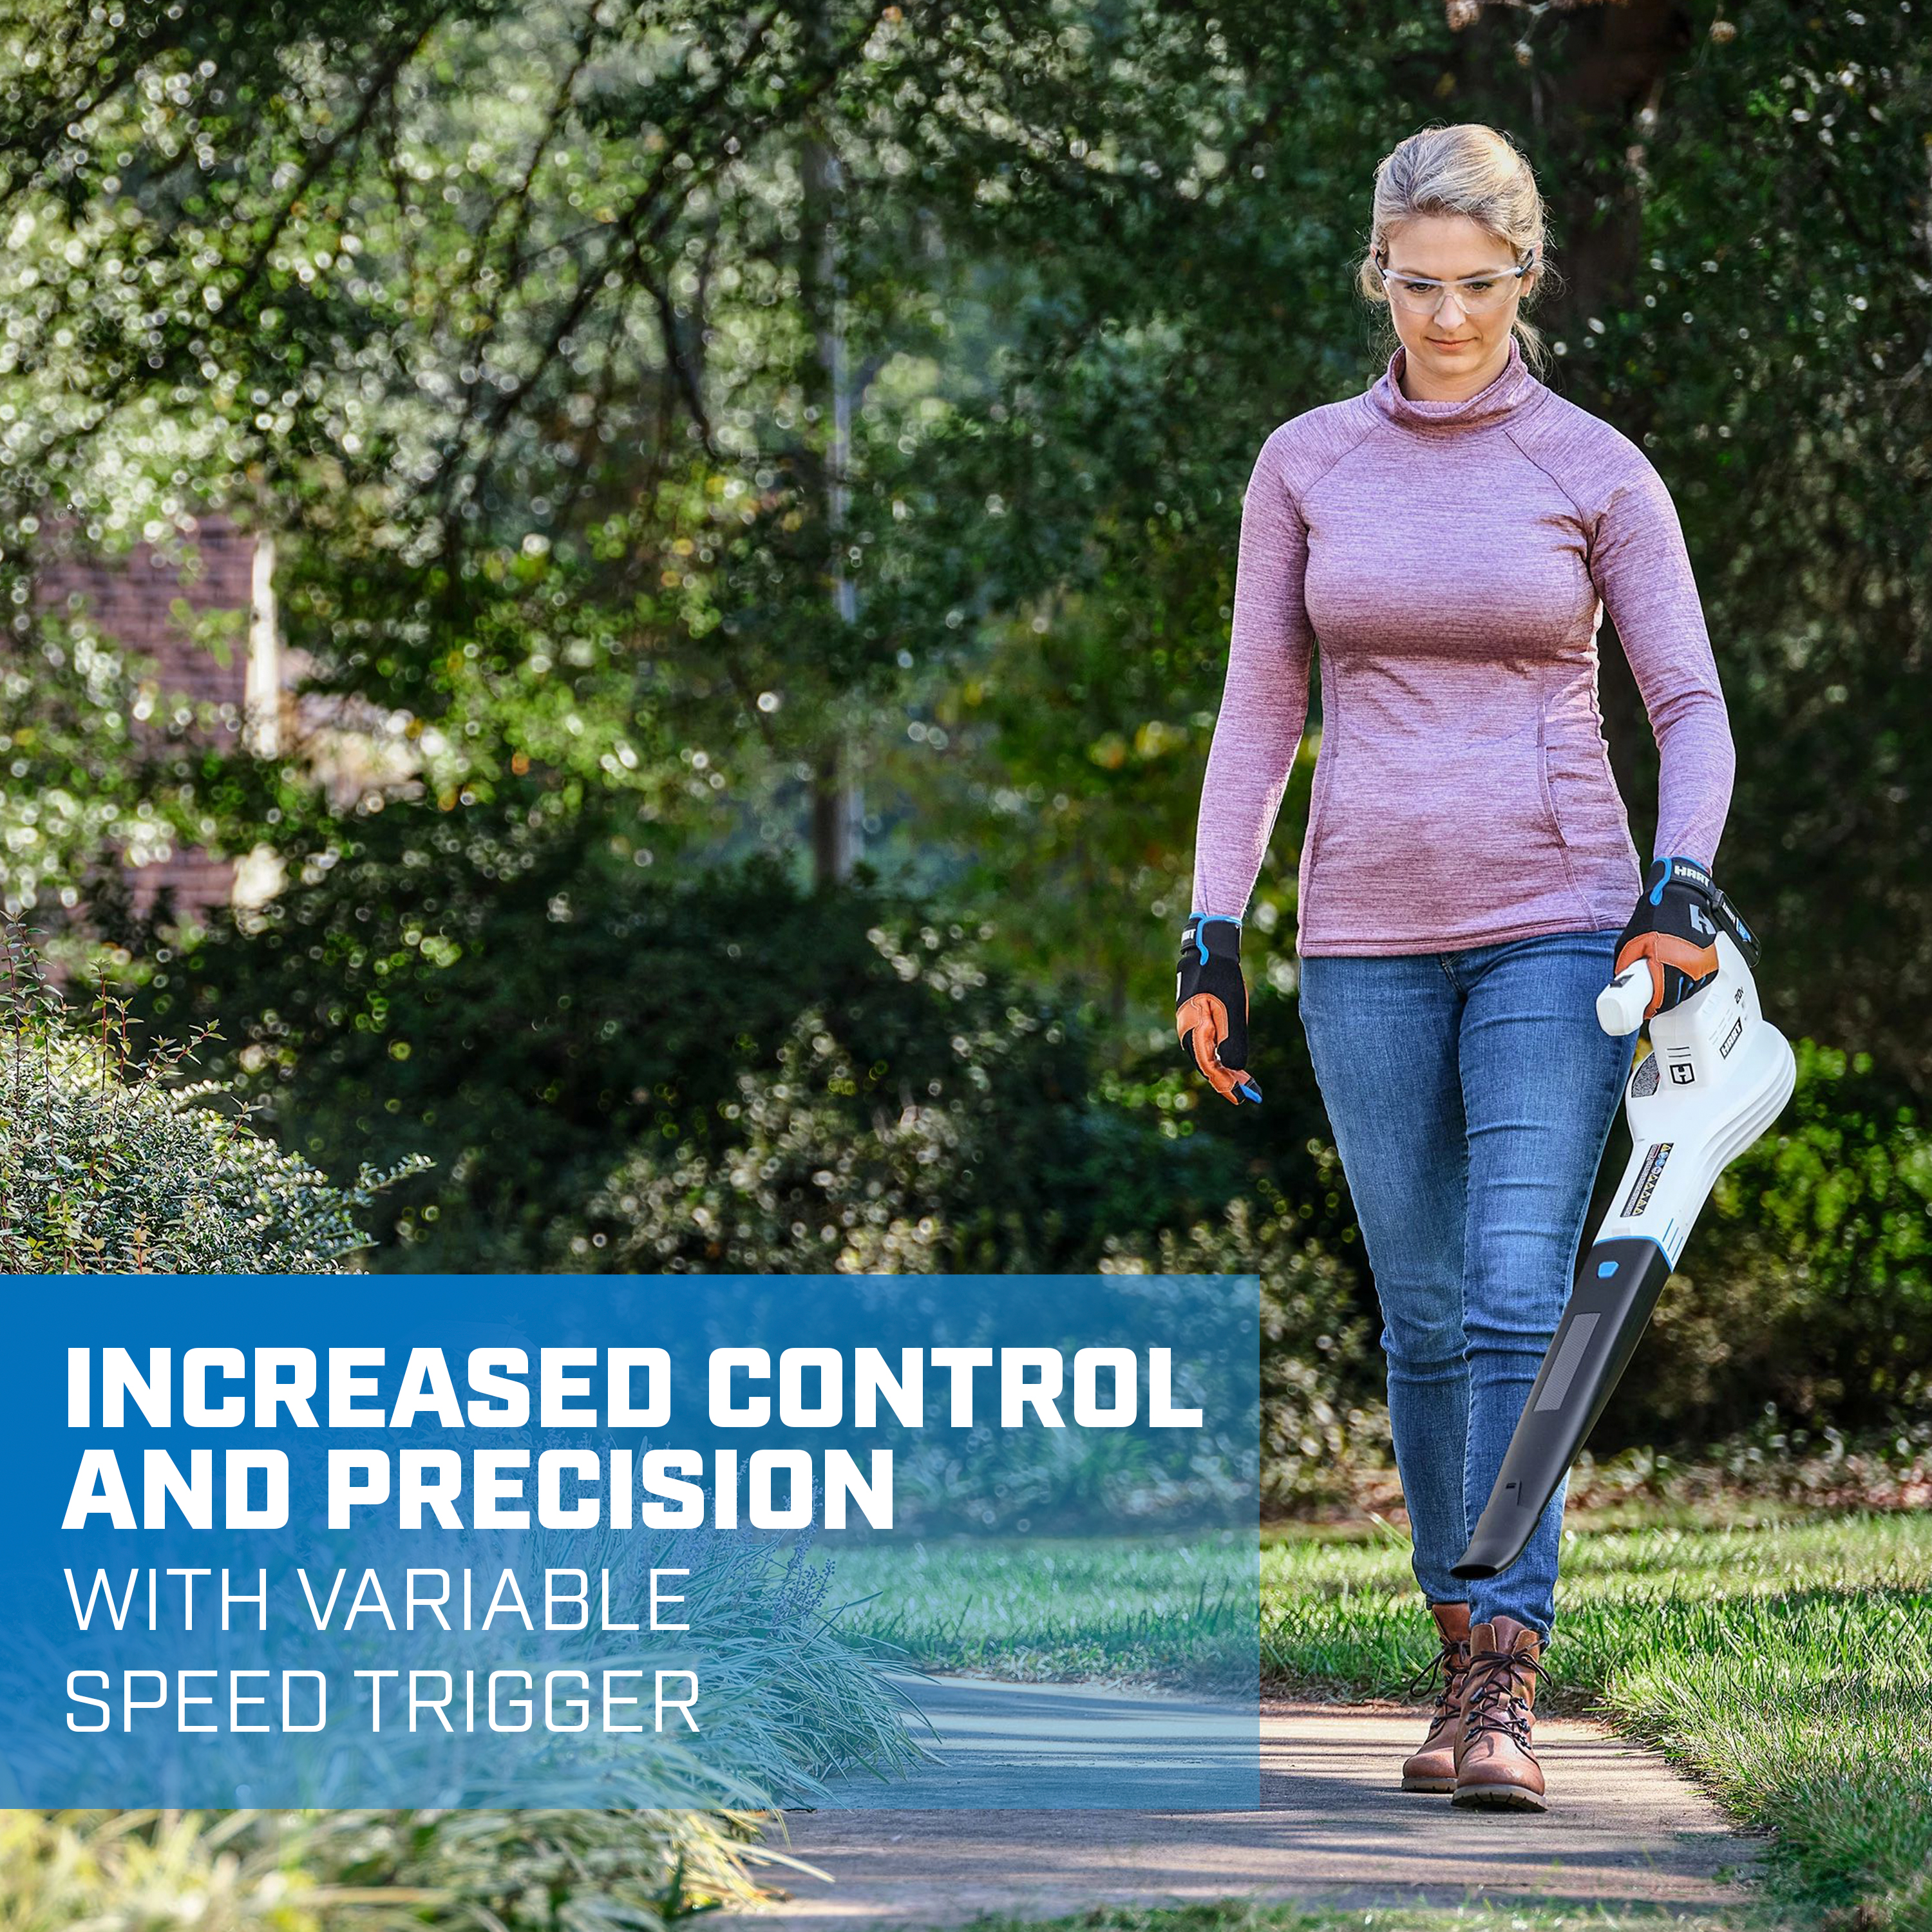 Increased control and precision with variable speed trigger